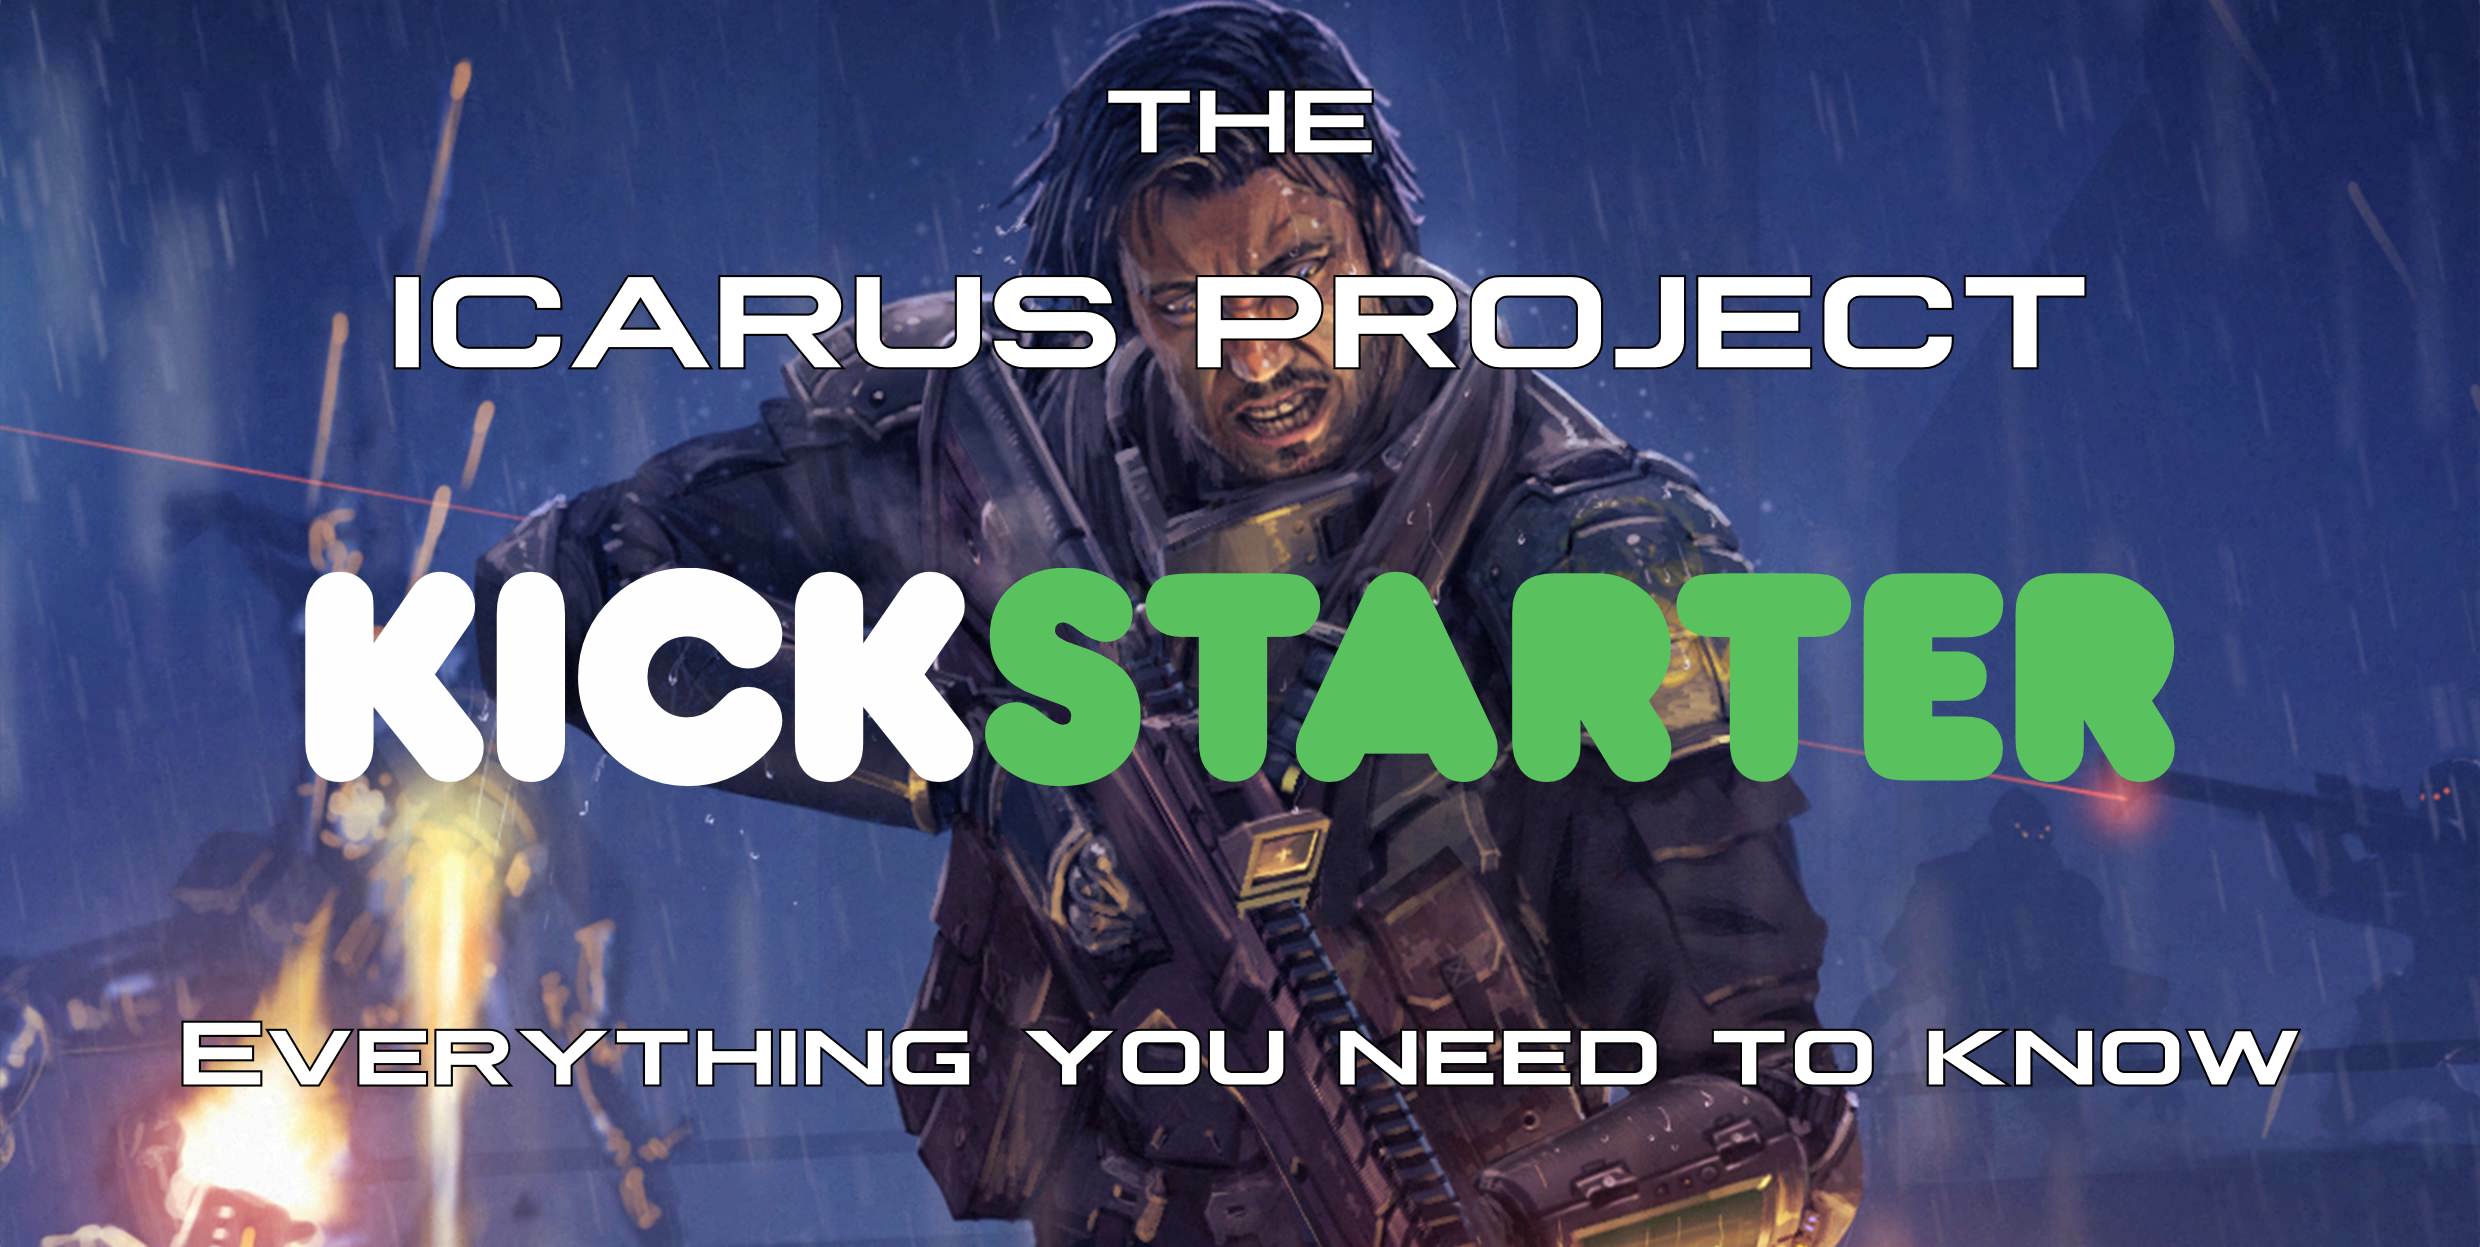 Everything You Need To Know About The Icarus Project Kickstarter